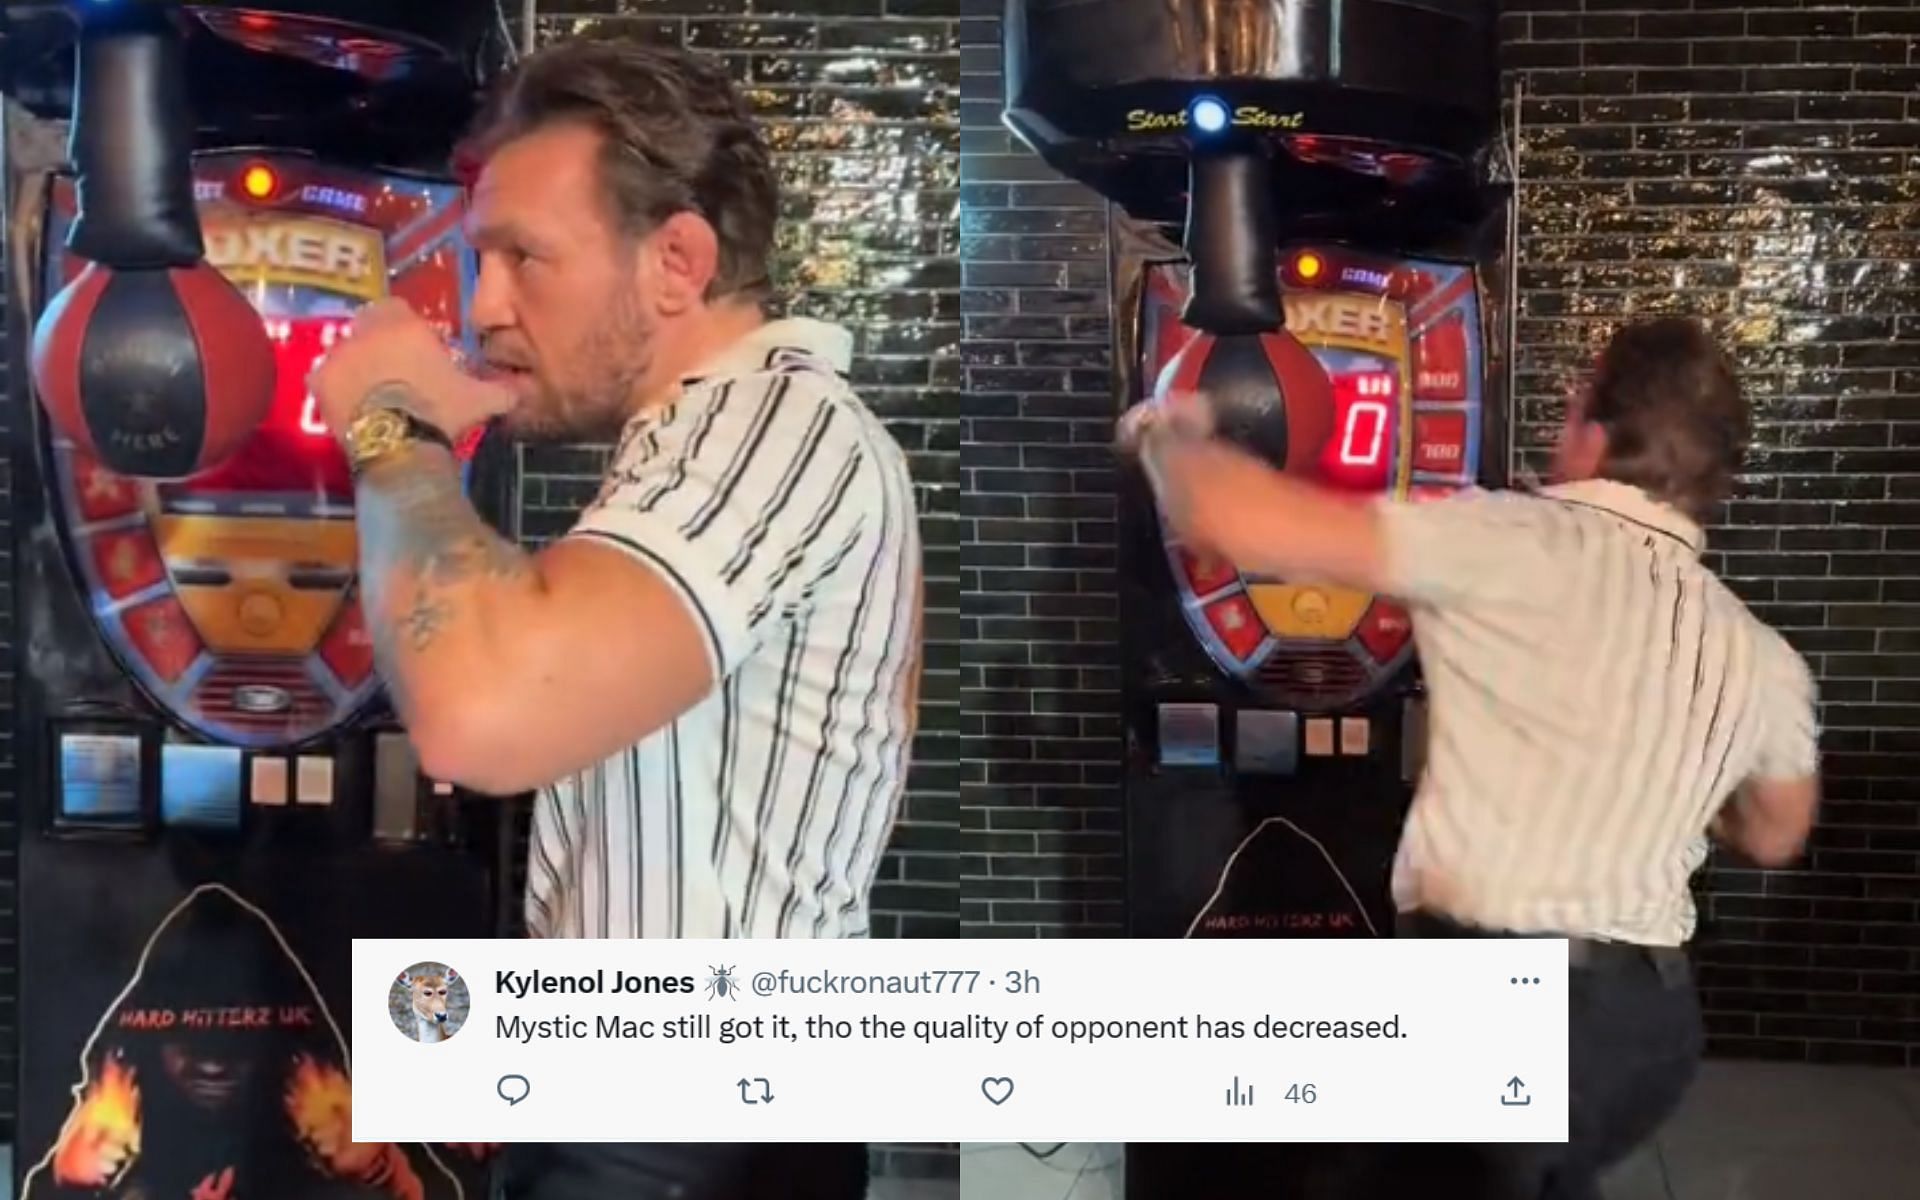 Conor McGregor drinking (left) and Conor McGregor punching the machine (right) (Image credits @TheArtOfWar6 on X)